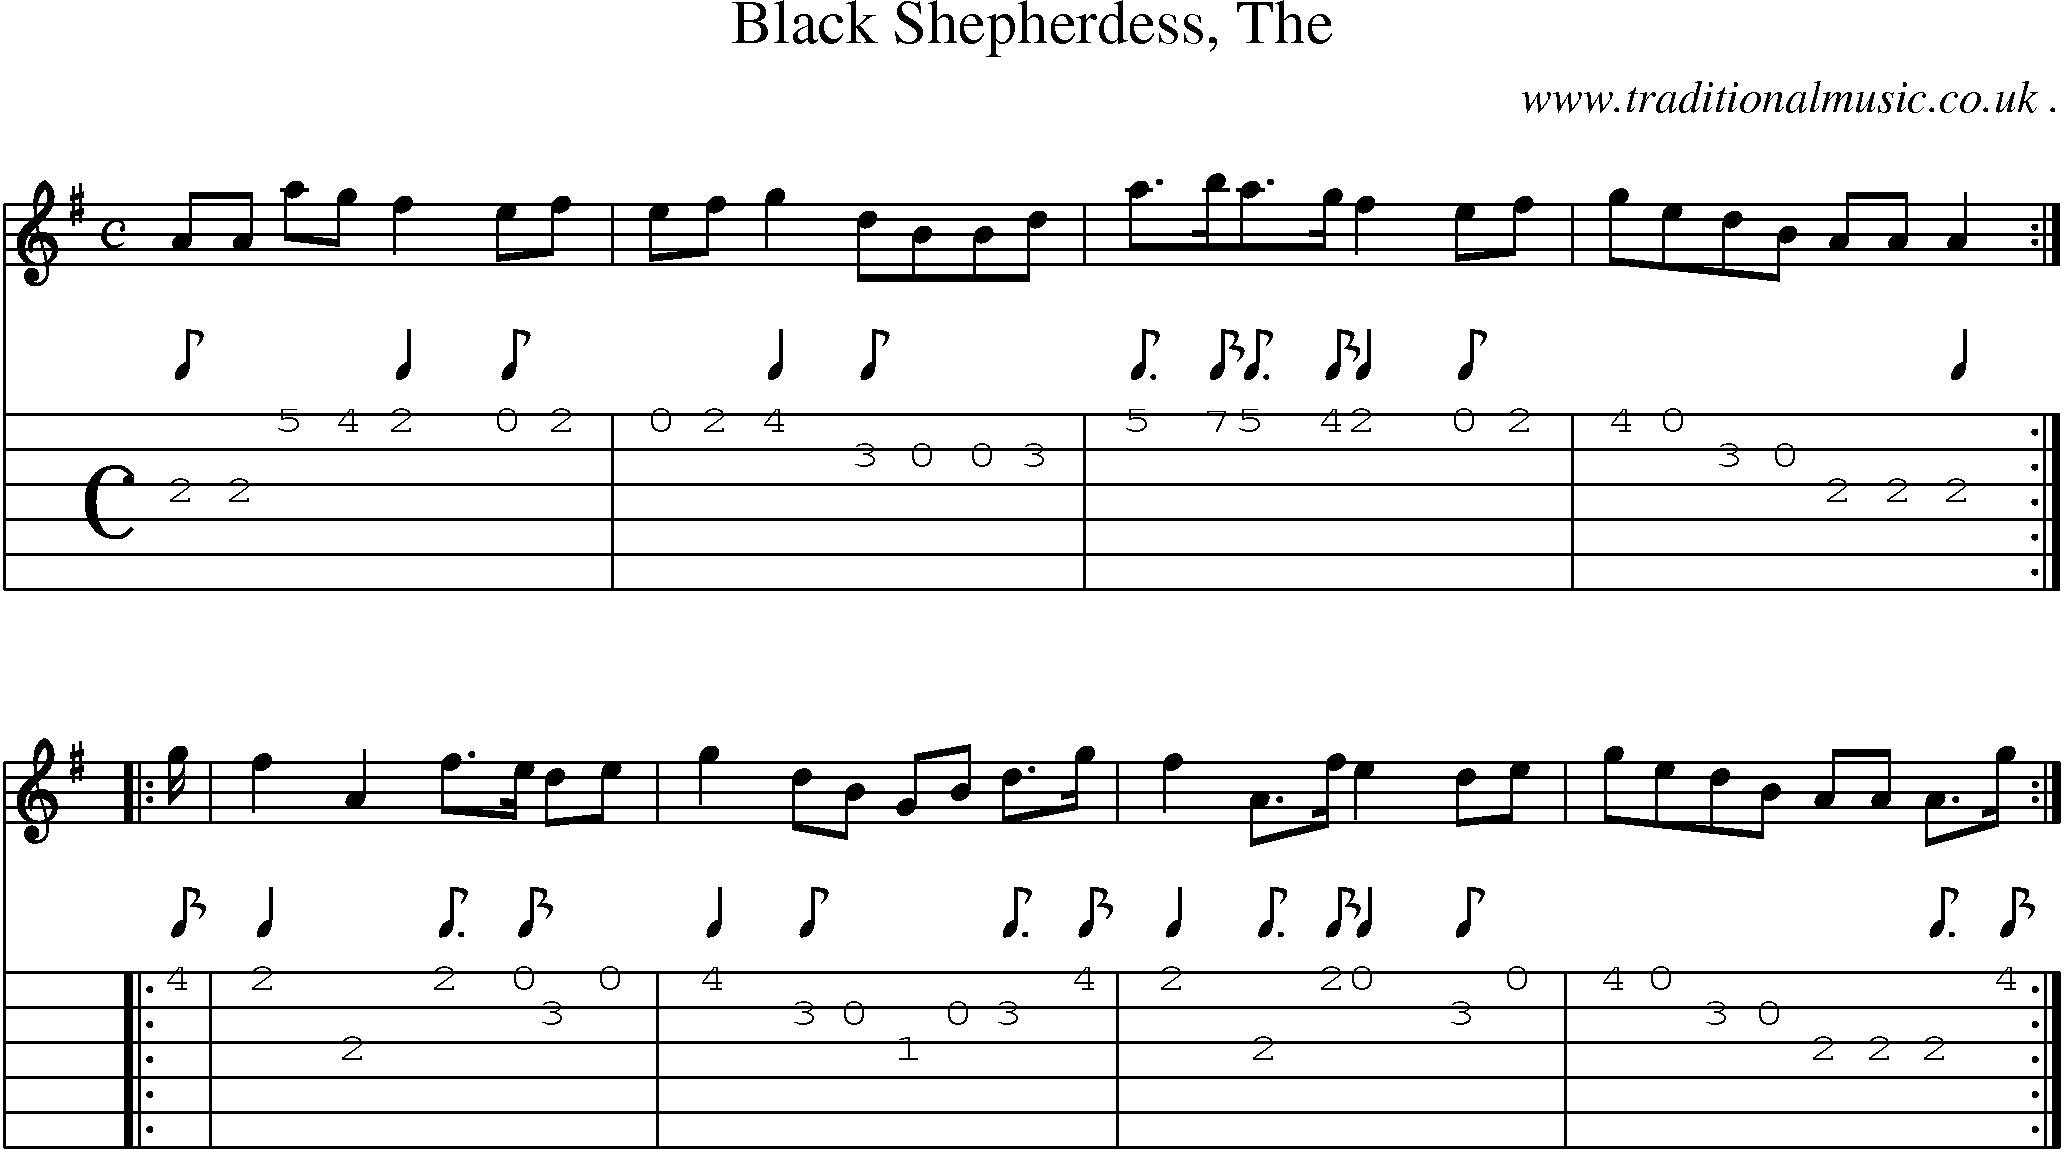 Sheet-music  score, Chords and Guitar Tabs for Black Shepherdess The